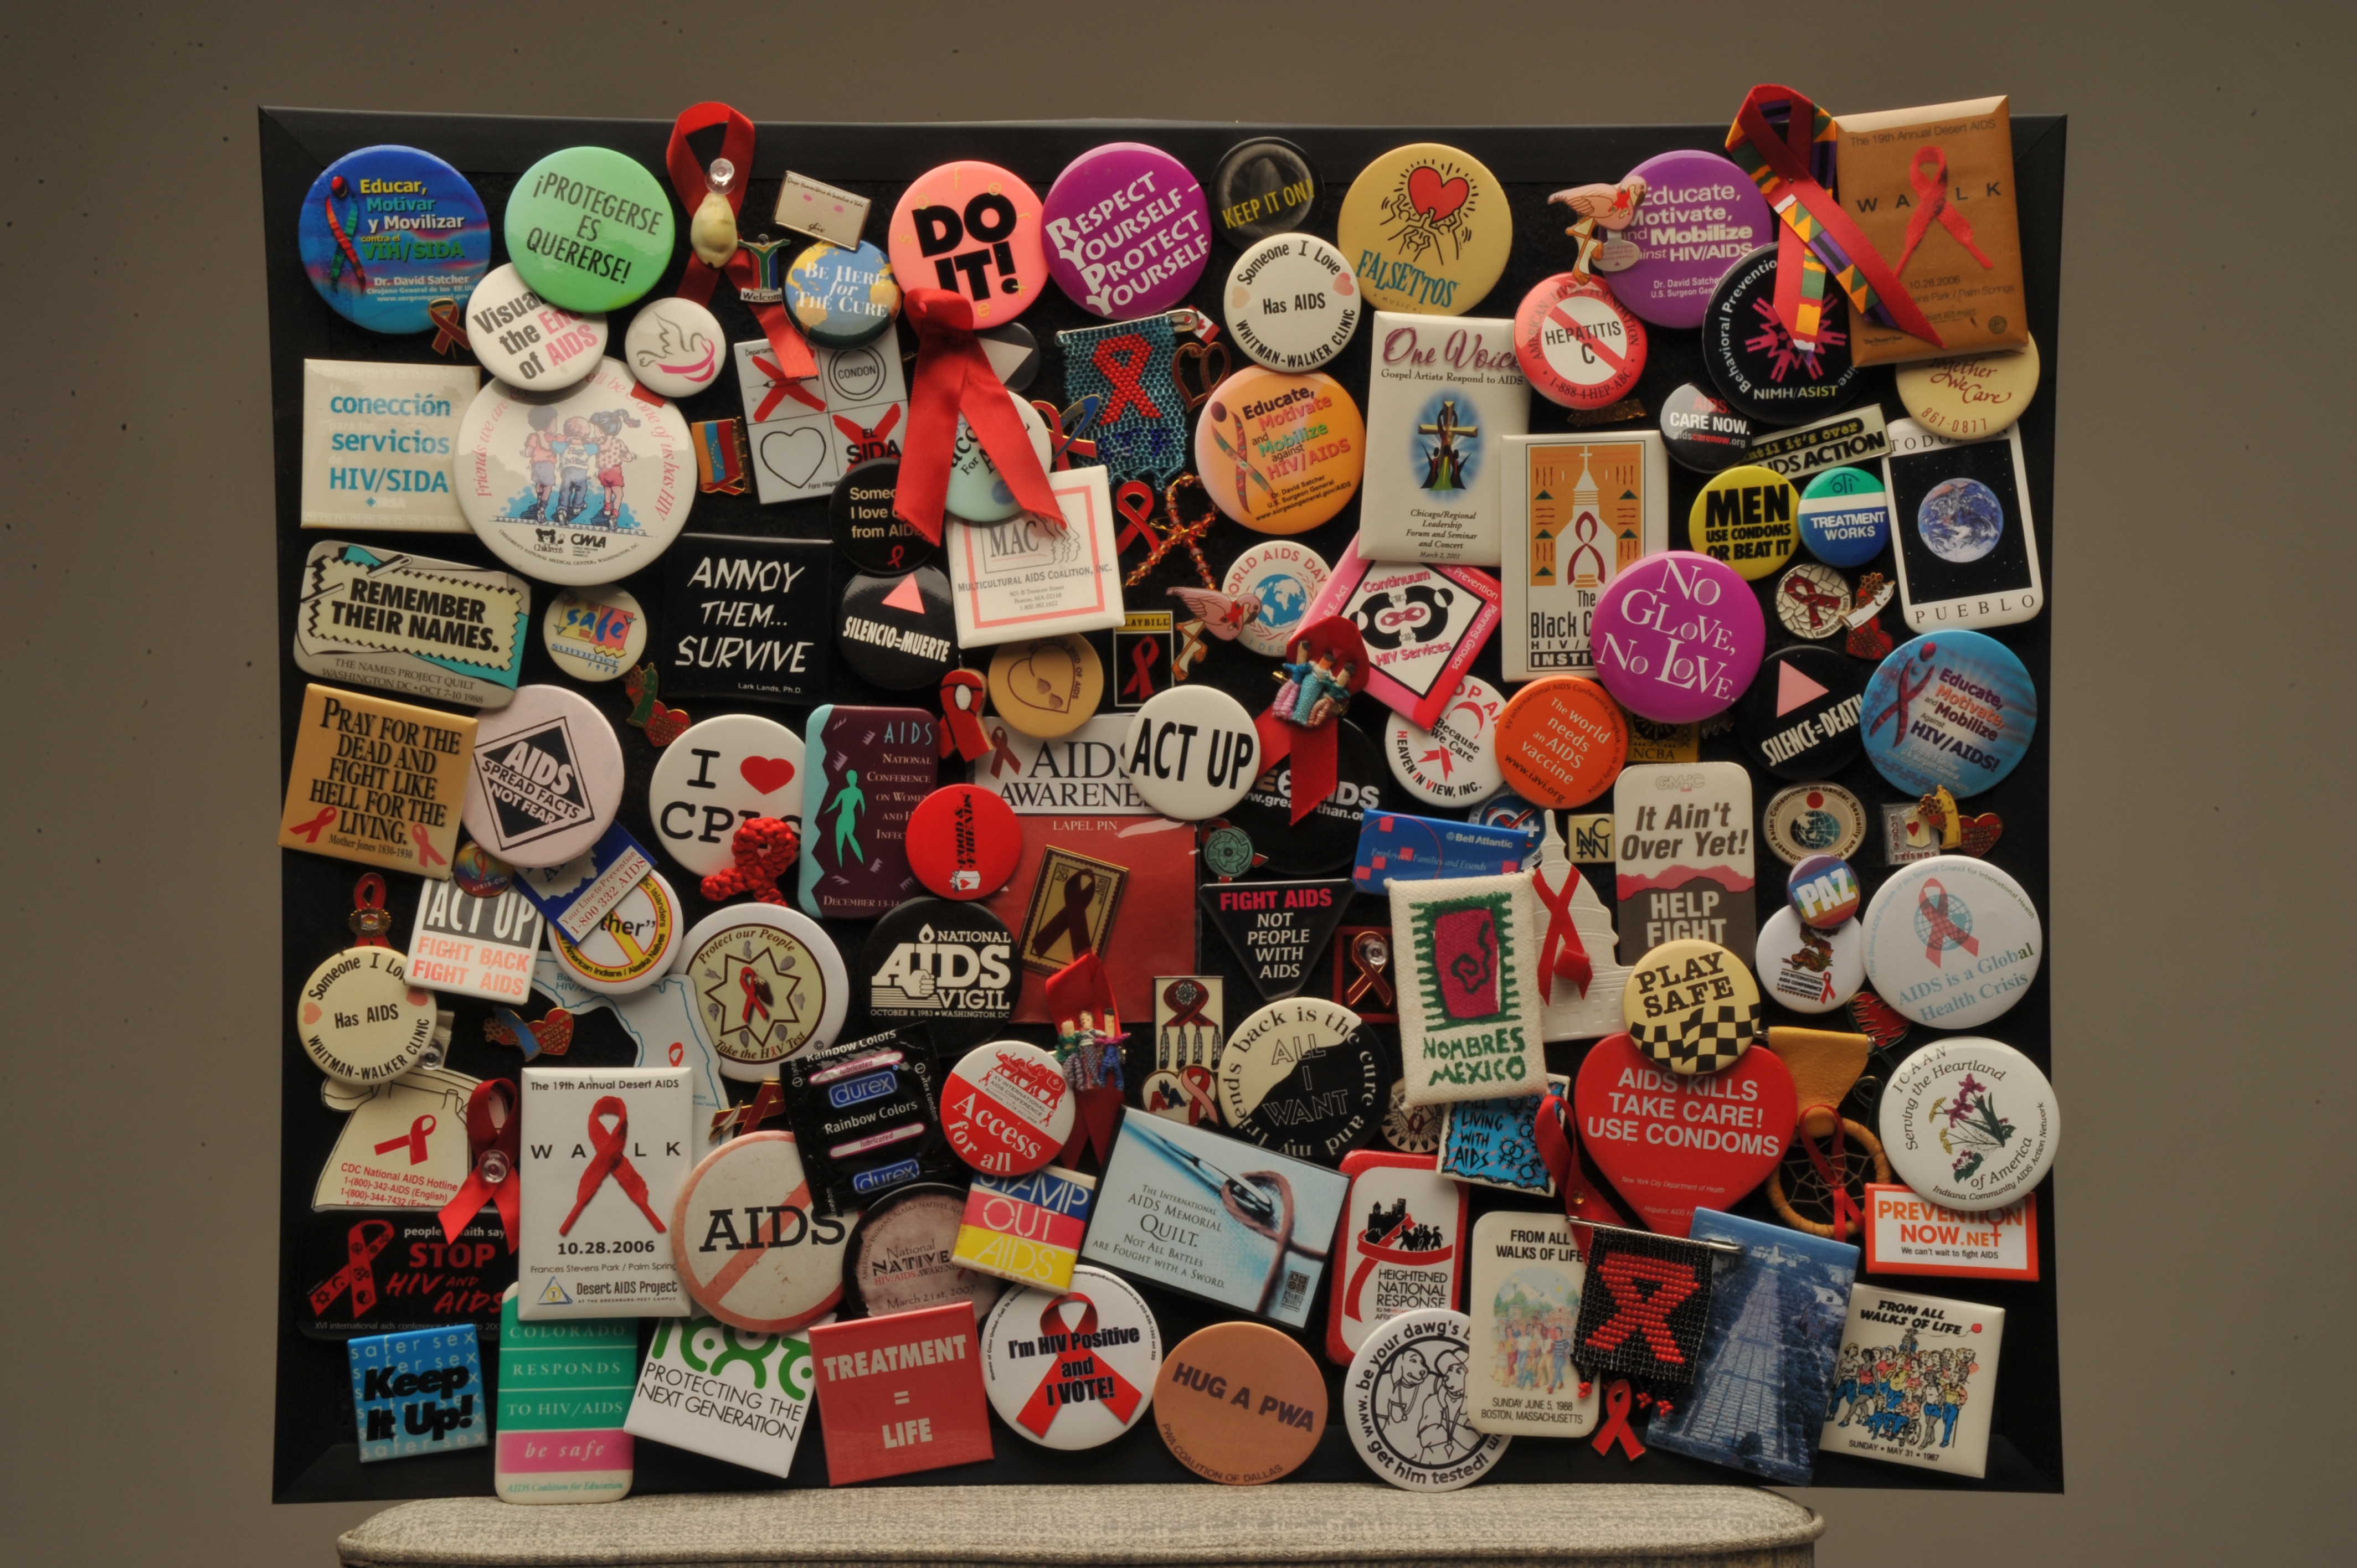 Pictured here: Photograph of AIDS button display, now featured in the Smithsonian Museum system.